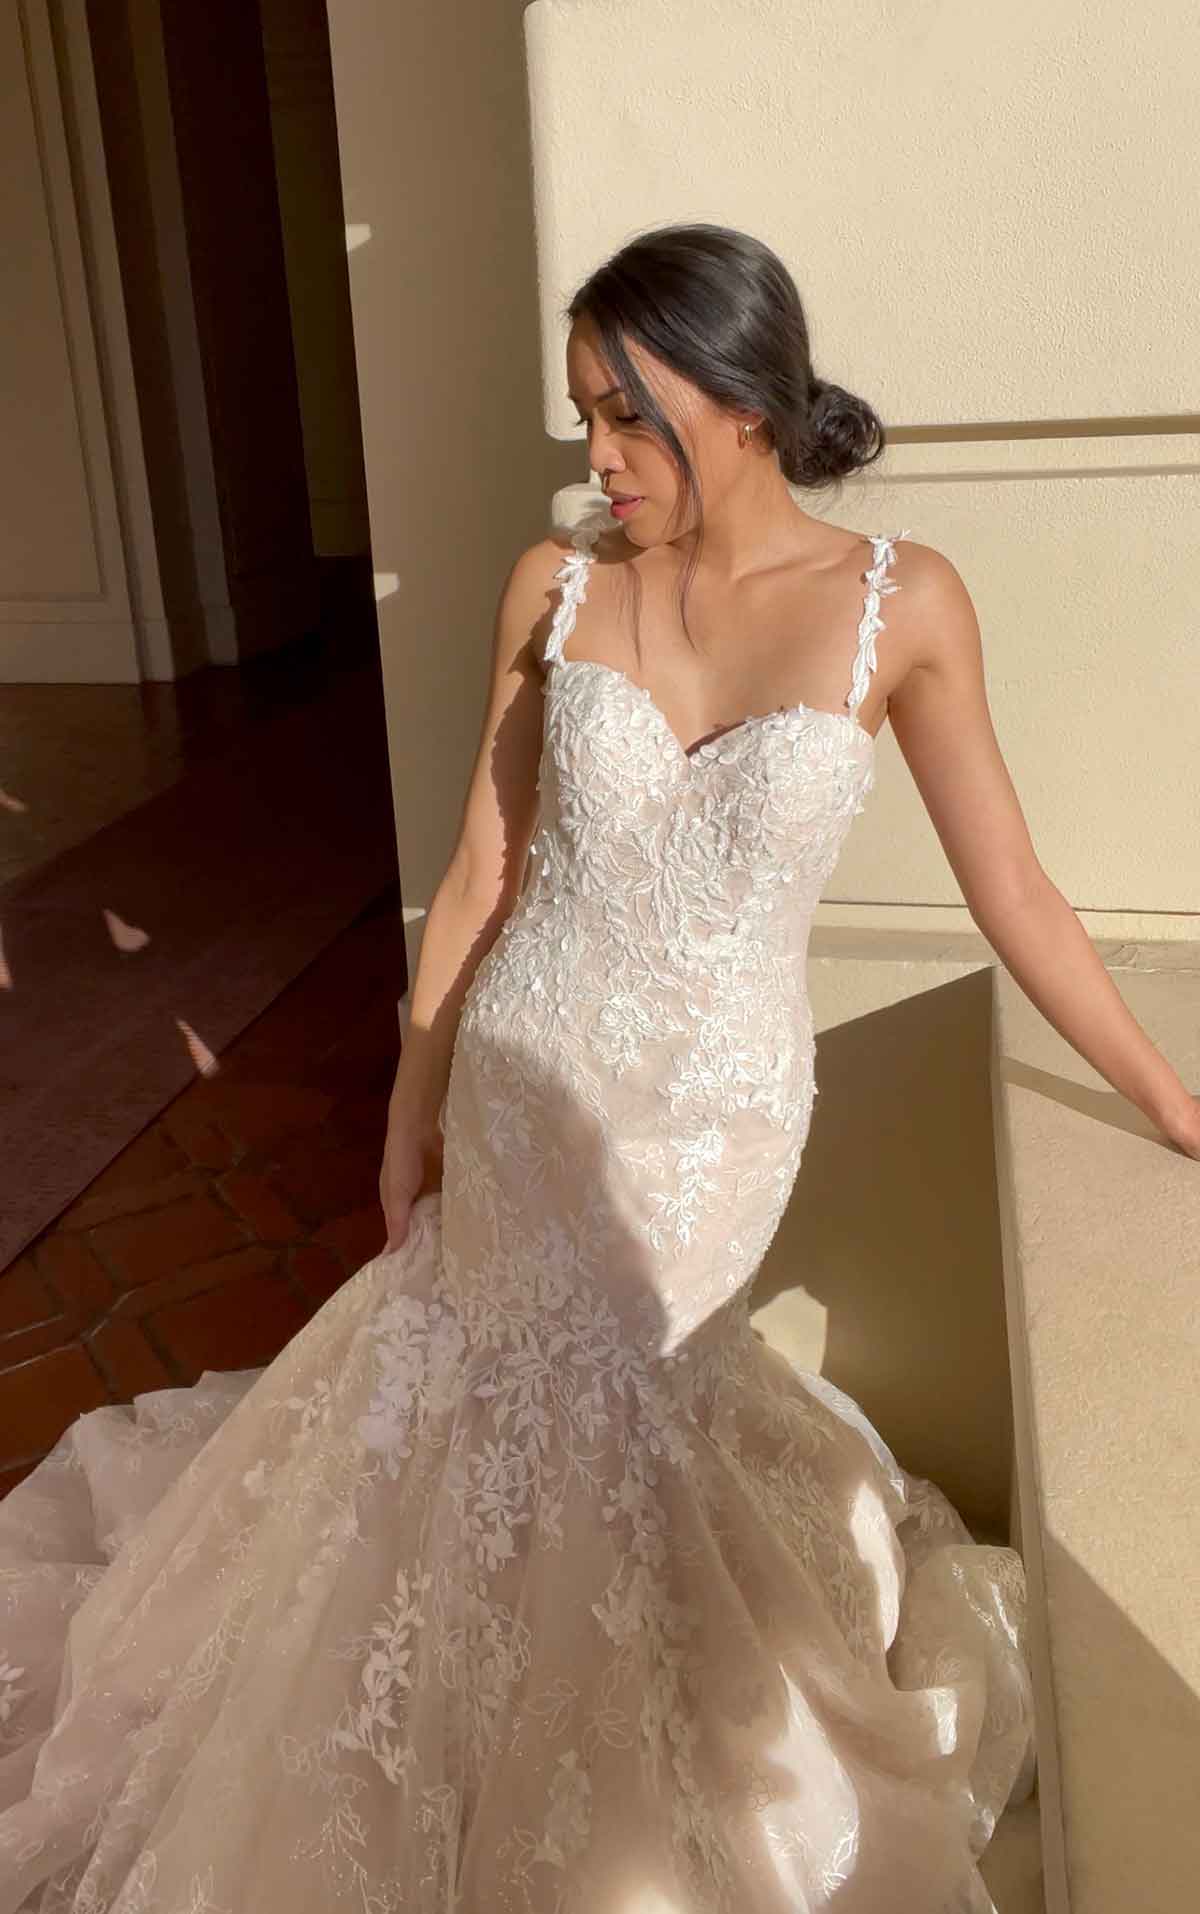 1375 Plunging V-Neckline Wedding Dress with Floral Skirt by Martina Liana